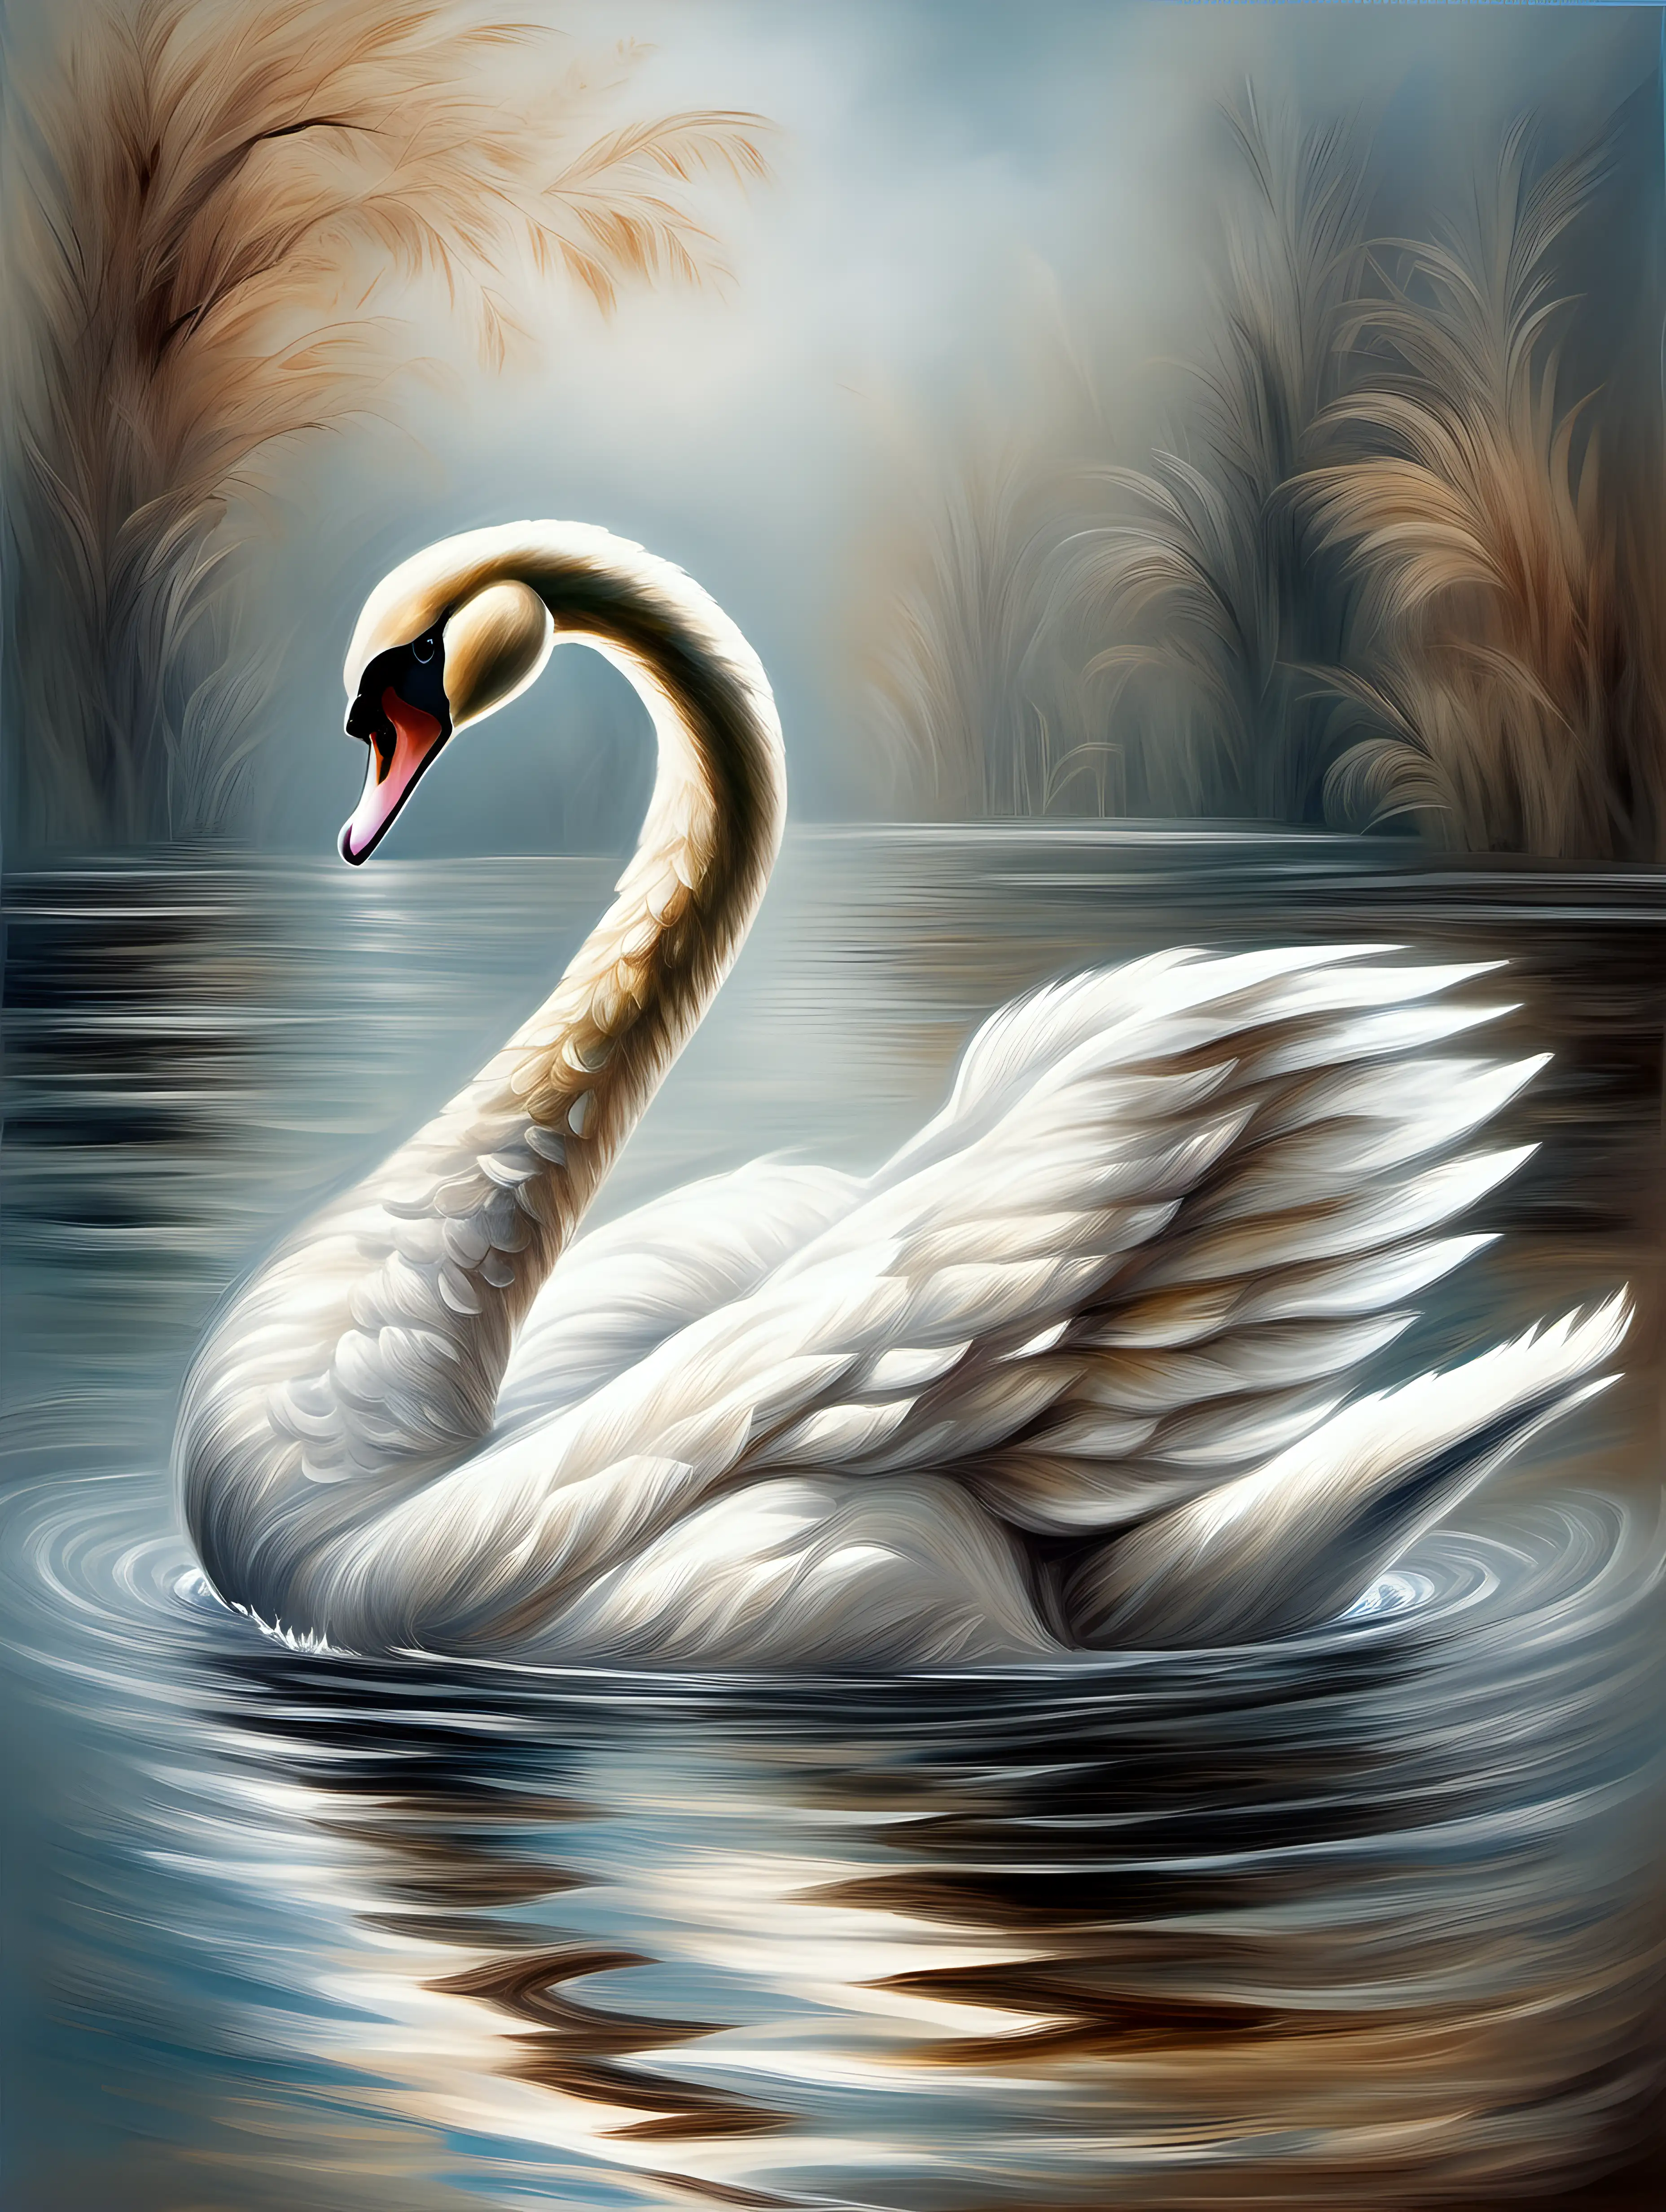 Baroque Swan Swimming on a Lake Elegant Oil Painting in Dusty Colors